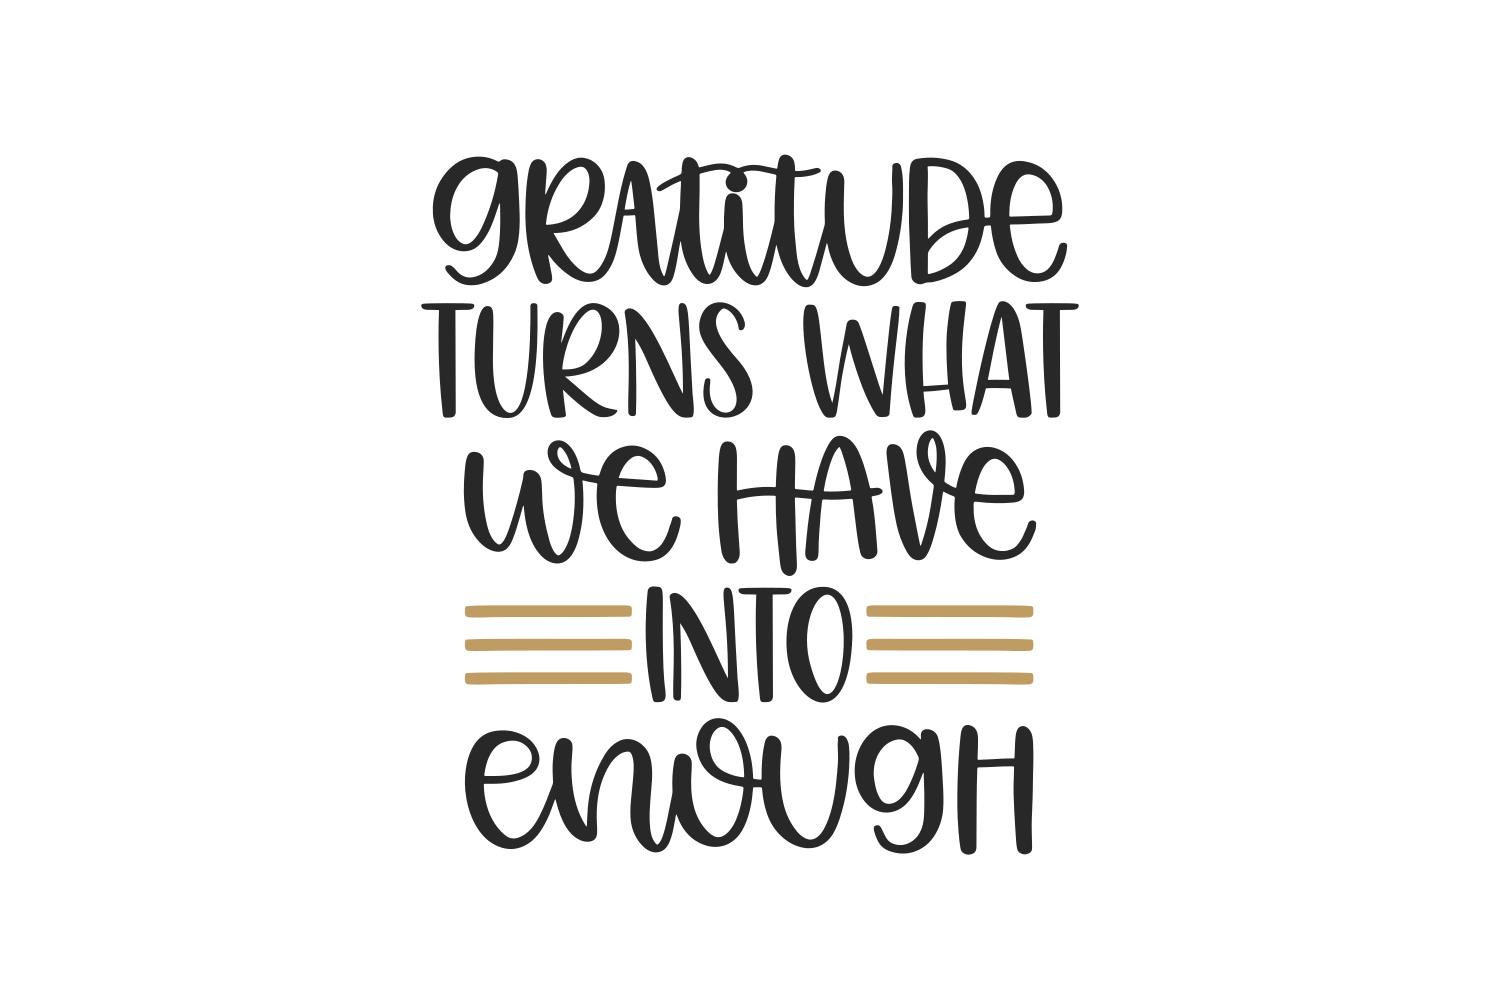 Gratitude Turns What We Have into Enough